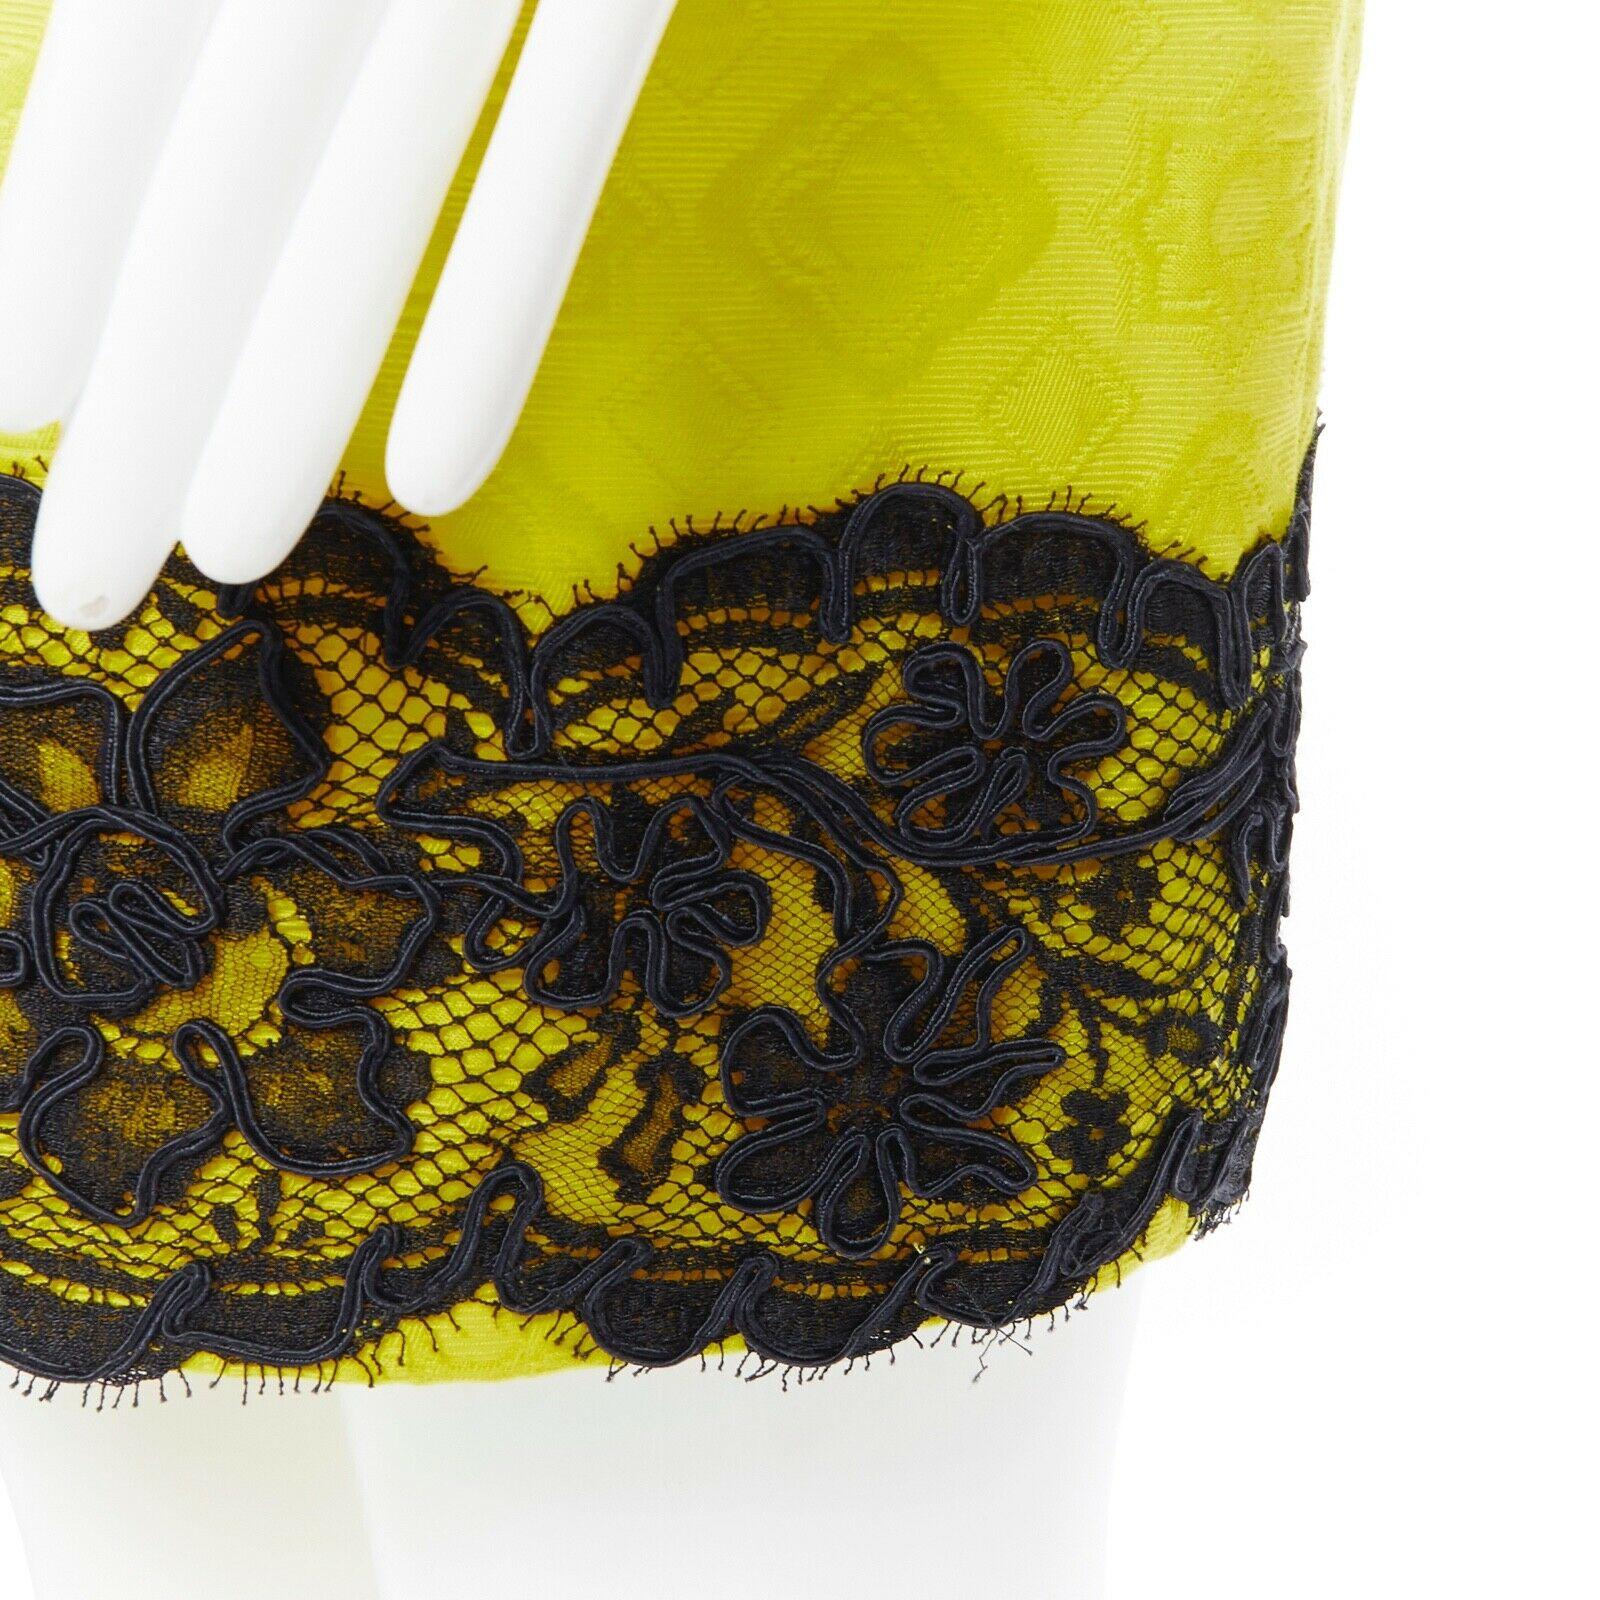 CHRISTIAN LACROIX yellow cotton floral jacquard black lace pencil skirt FR40
Brand: Christian Lacroix
Designer: Christian Lacroix
Model Name / Style: Mini skirt
Material: Cotton and lace
Color: Yellow; and black
Pattern: Floral lace
Closure: